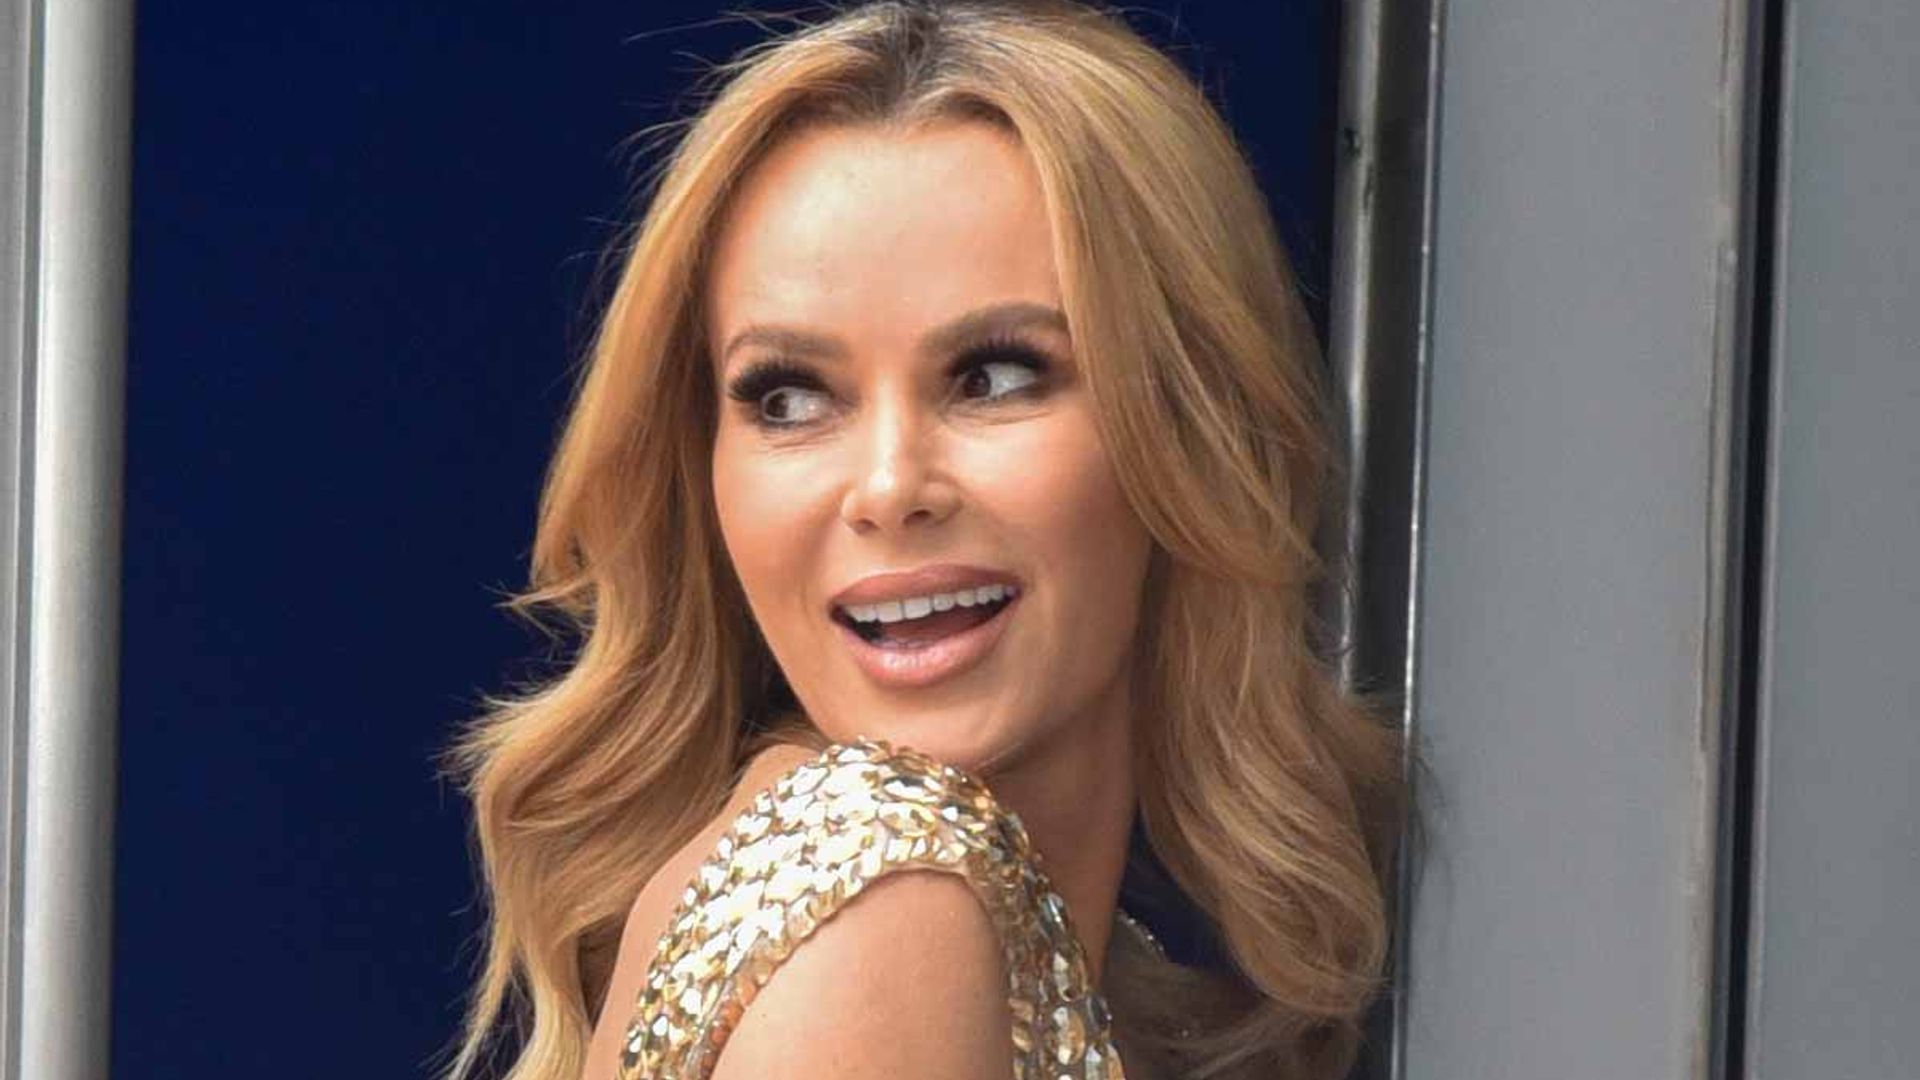 Amanda Holden stunned fans in showstopping dress for surprise Eurovision appearance